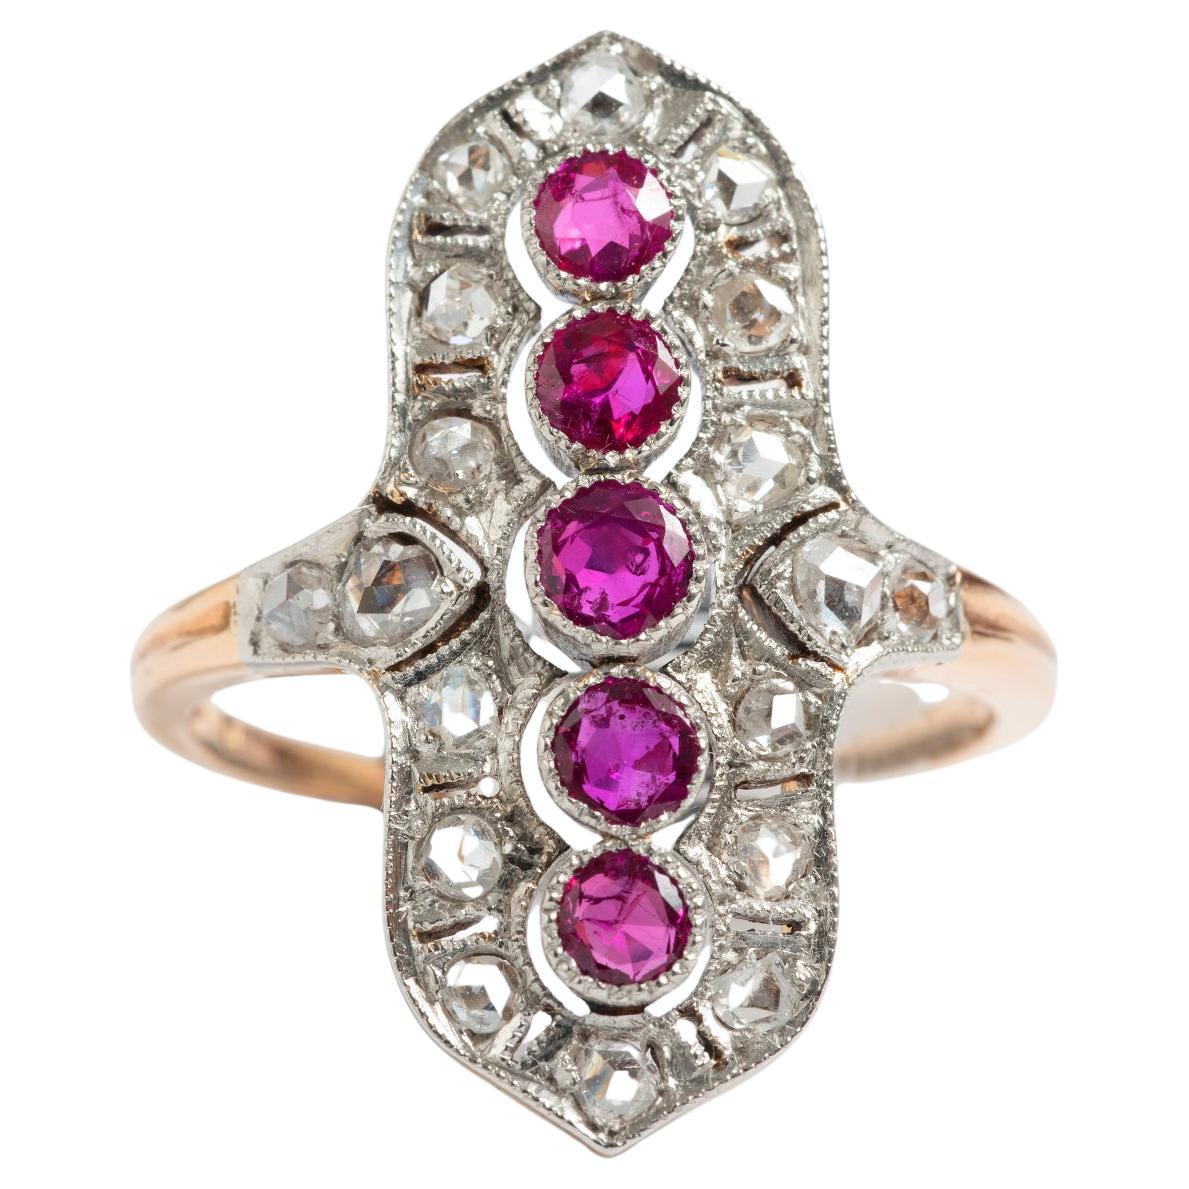 Antique Diamond & Ruby Ring, 1900's, 5 x Rubies, 15K Yellow Gold. US Size 8.75 For Sale